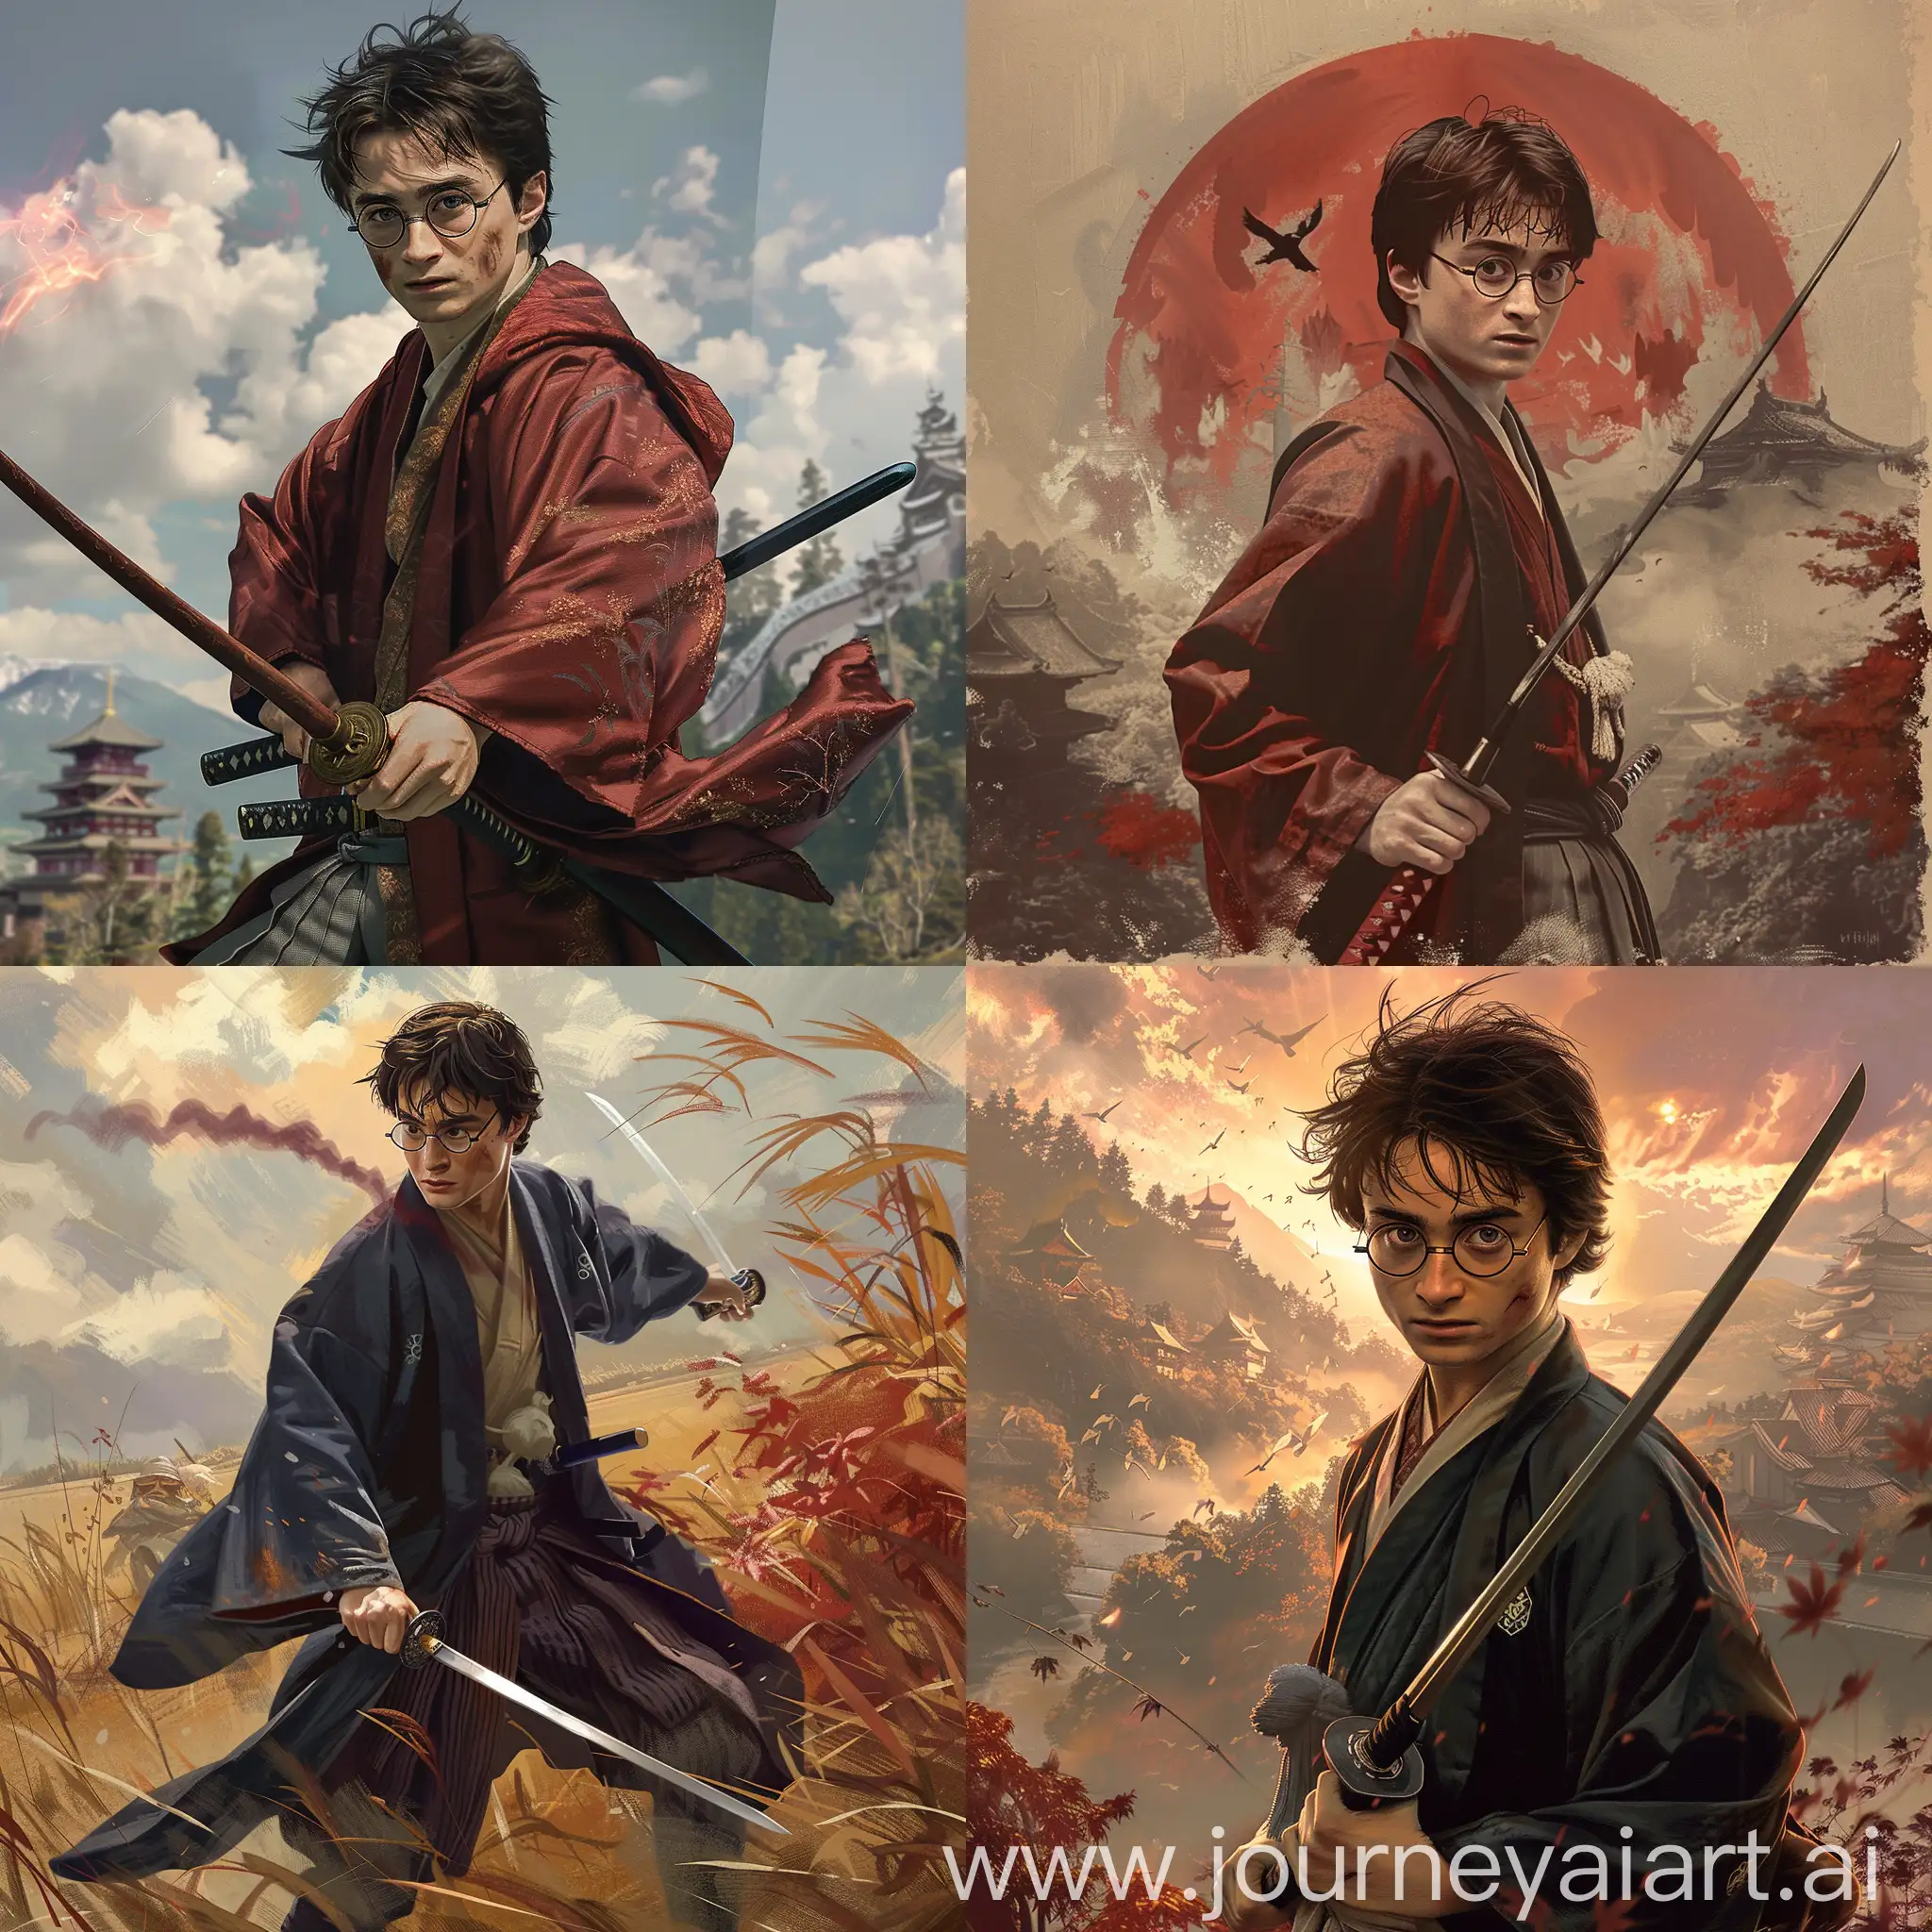 Create images that depict Harry Potter as a samurai wizard from 19th-century Japan. Show him navigating through feudal landscapes while wielding both his magical powers and sword skills, encountering various challenges along the way. The scenes should be realistic in nature and showcase the unique blend of Eastern and Western elements.